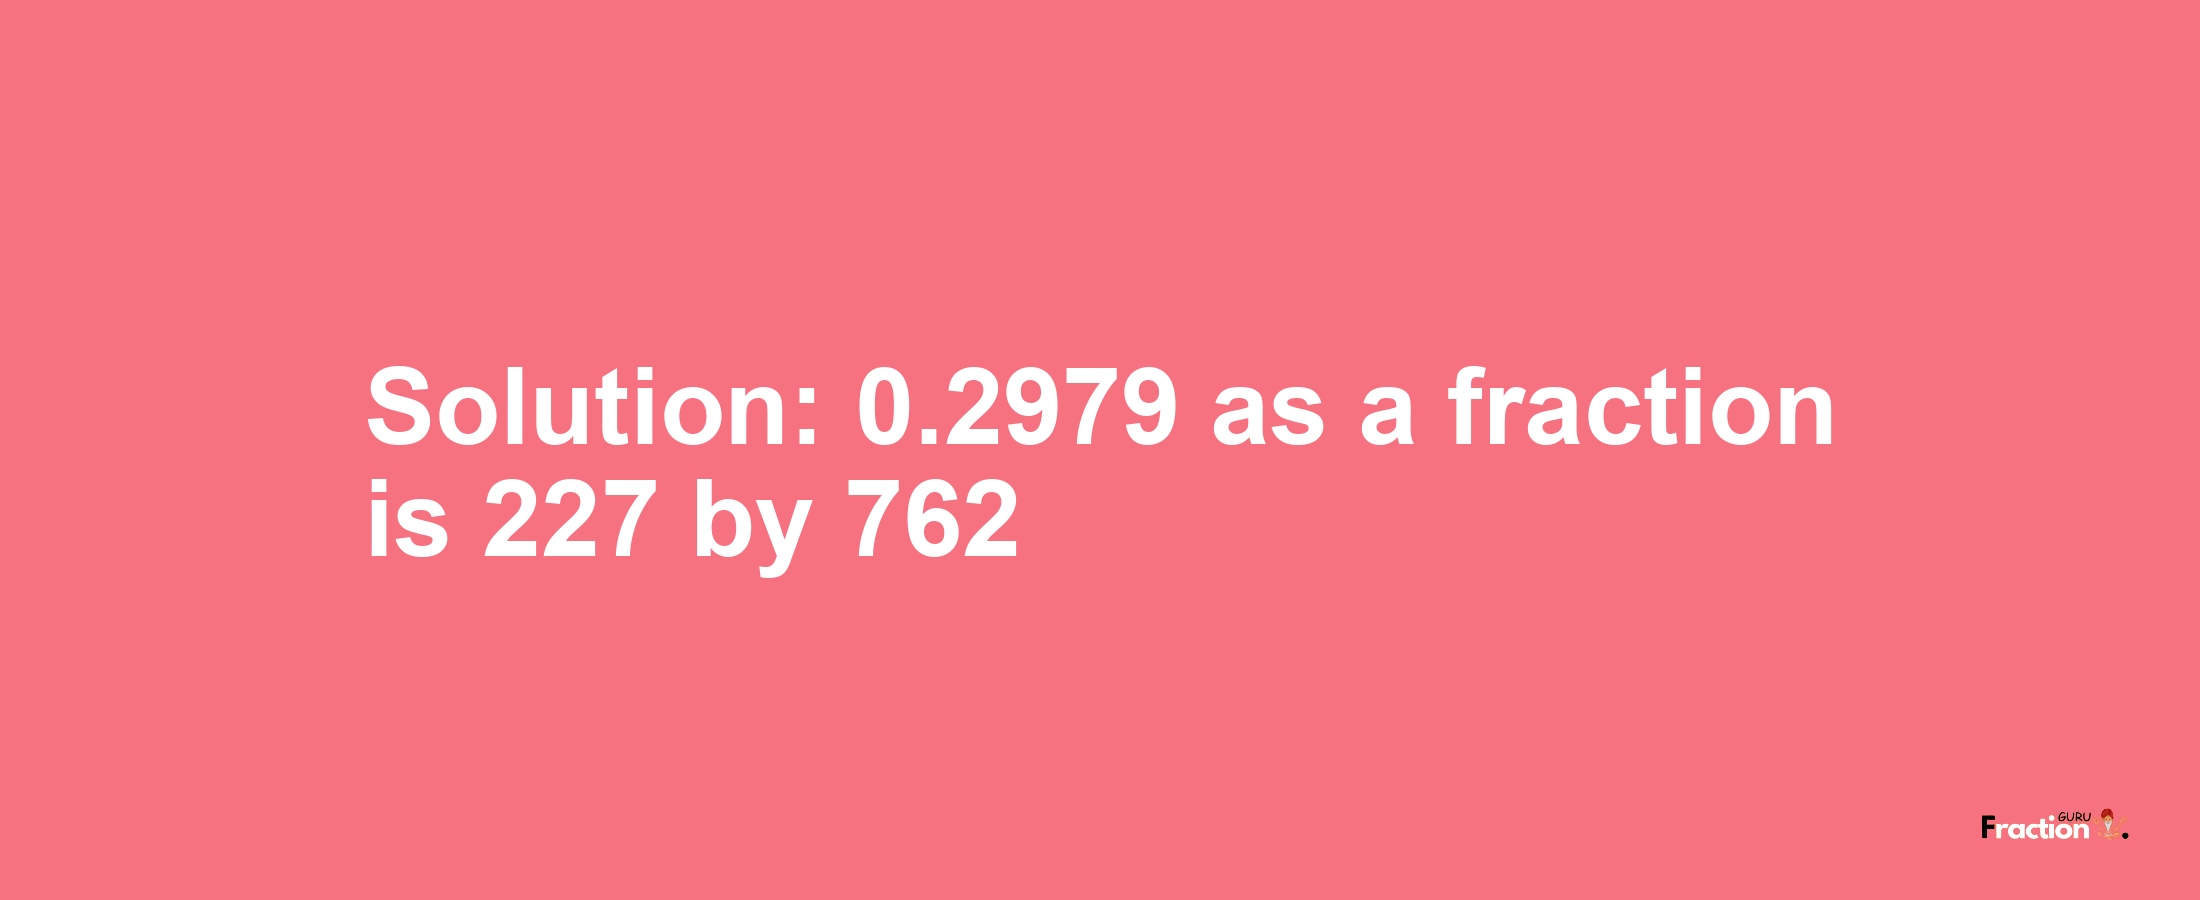 Solution:0.2979 as a fraction is 227/762